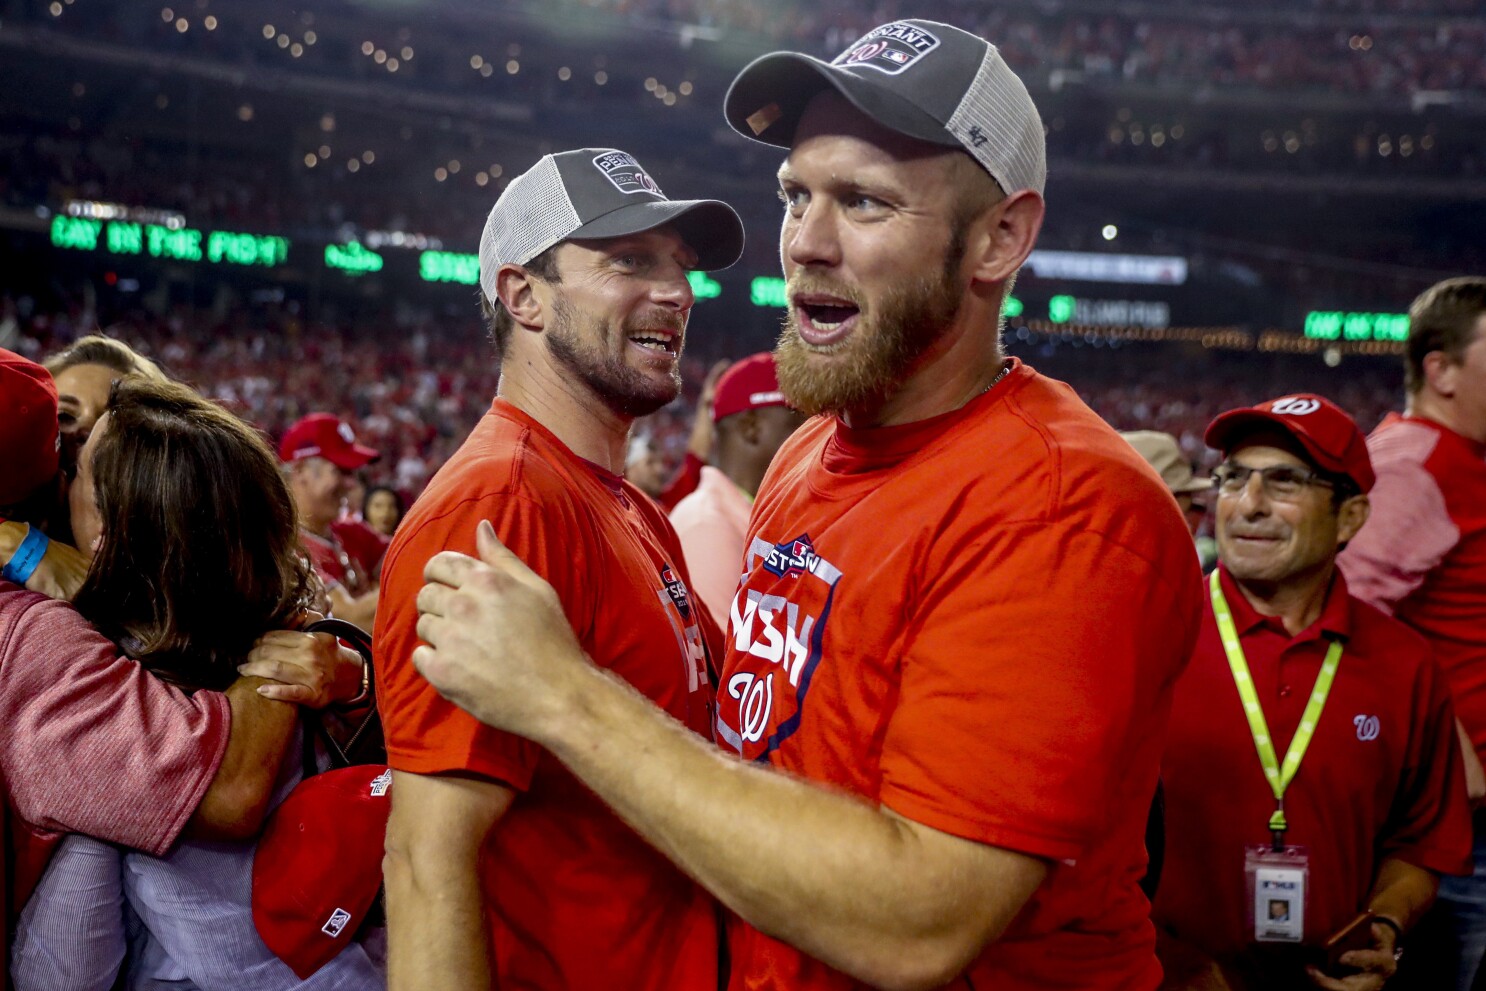 Nationals pitcher Stephen Strasburg, the 2019 World Series MVP, has decided  to retire